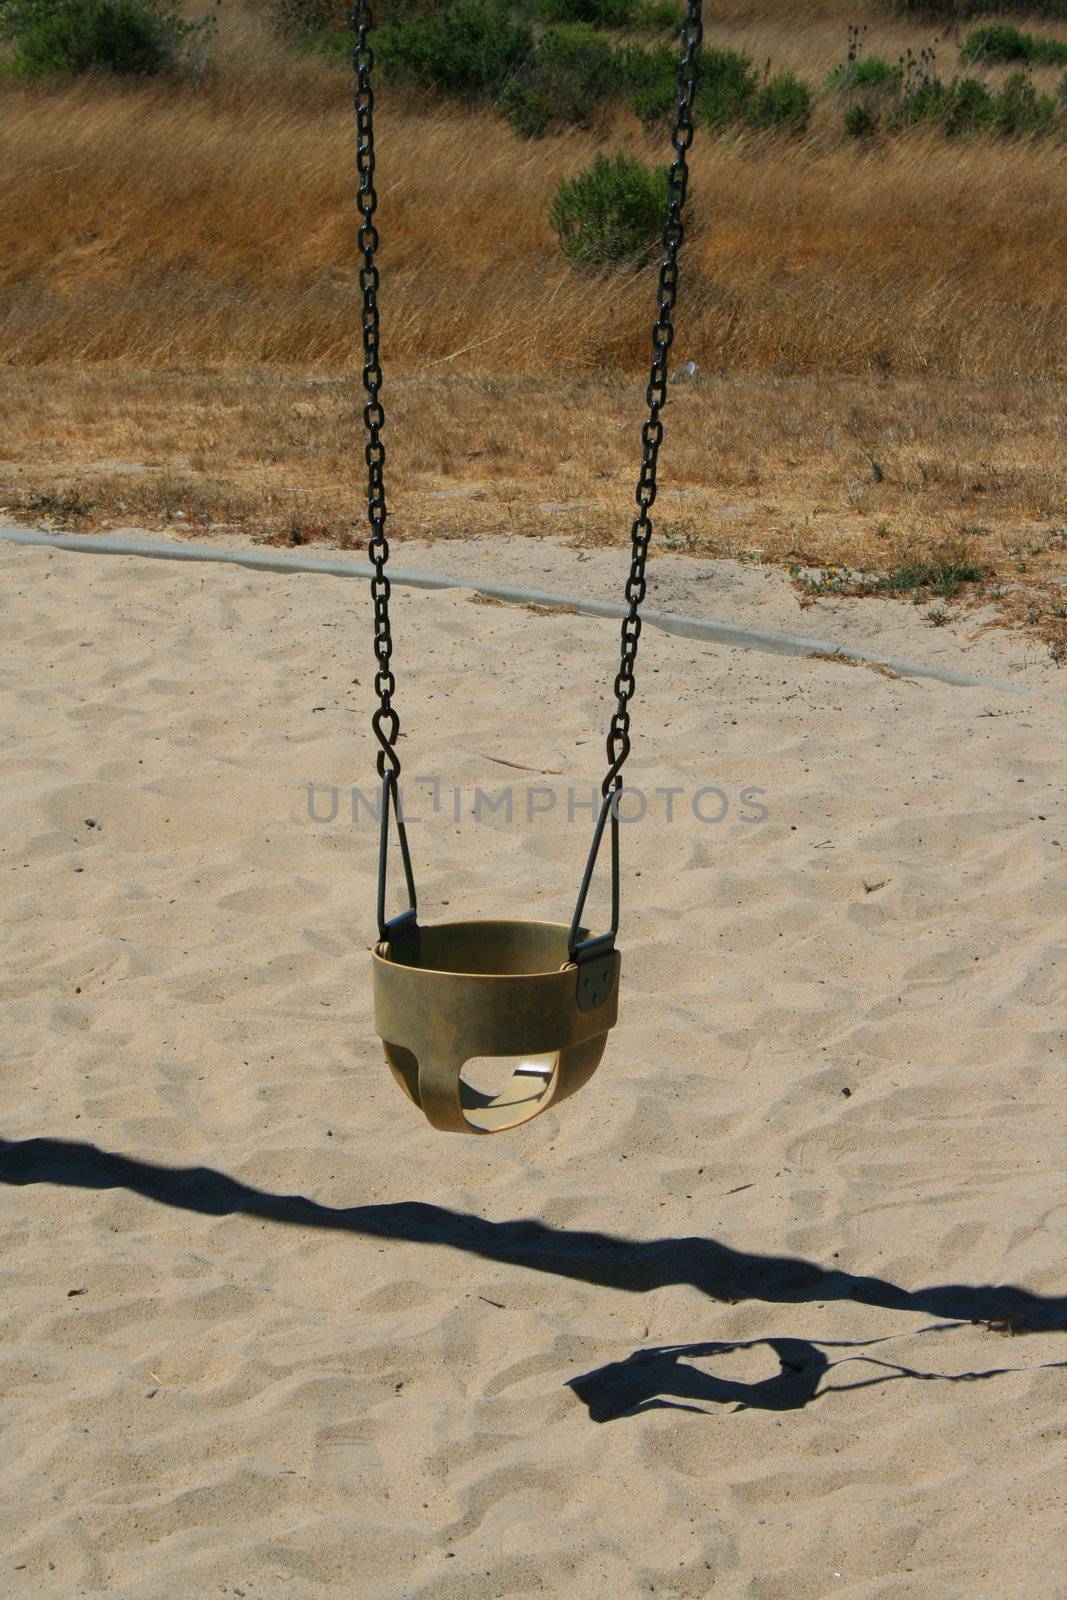 Close up of swings in a playground.
